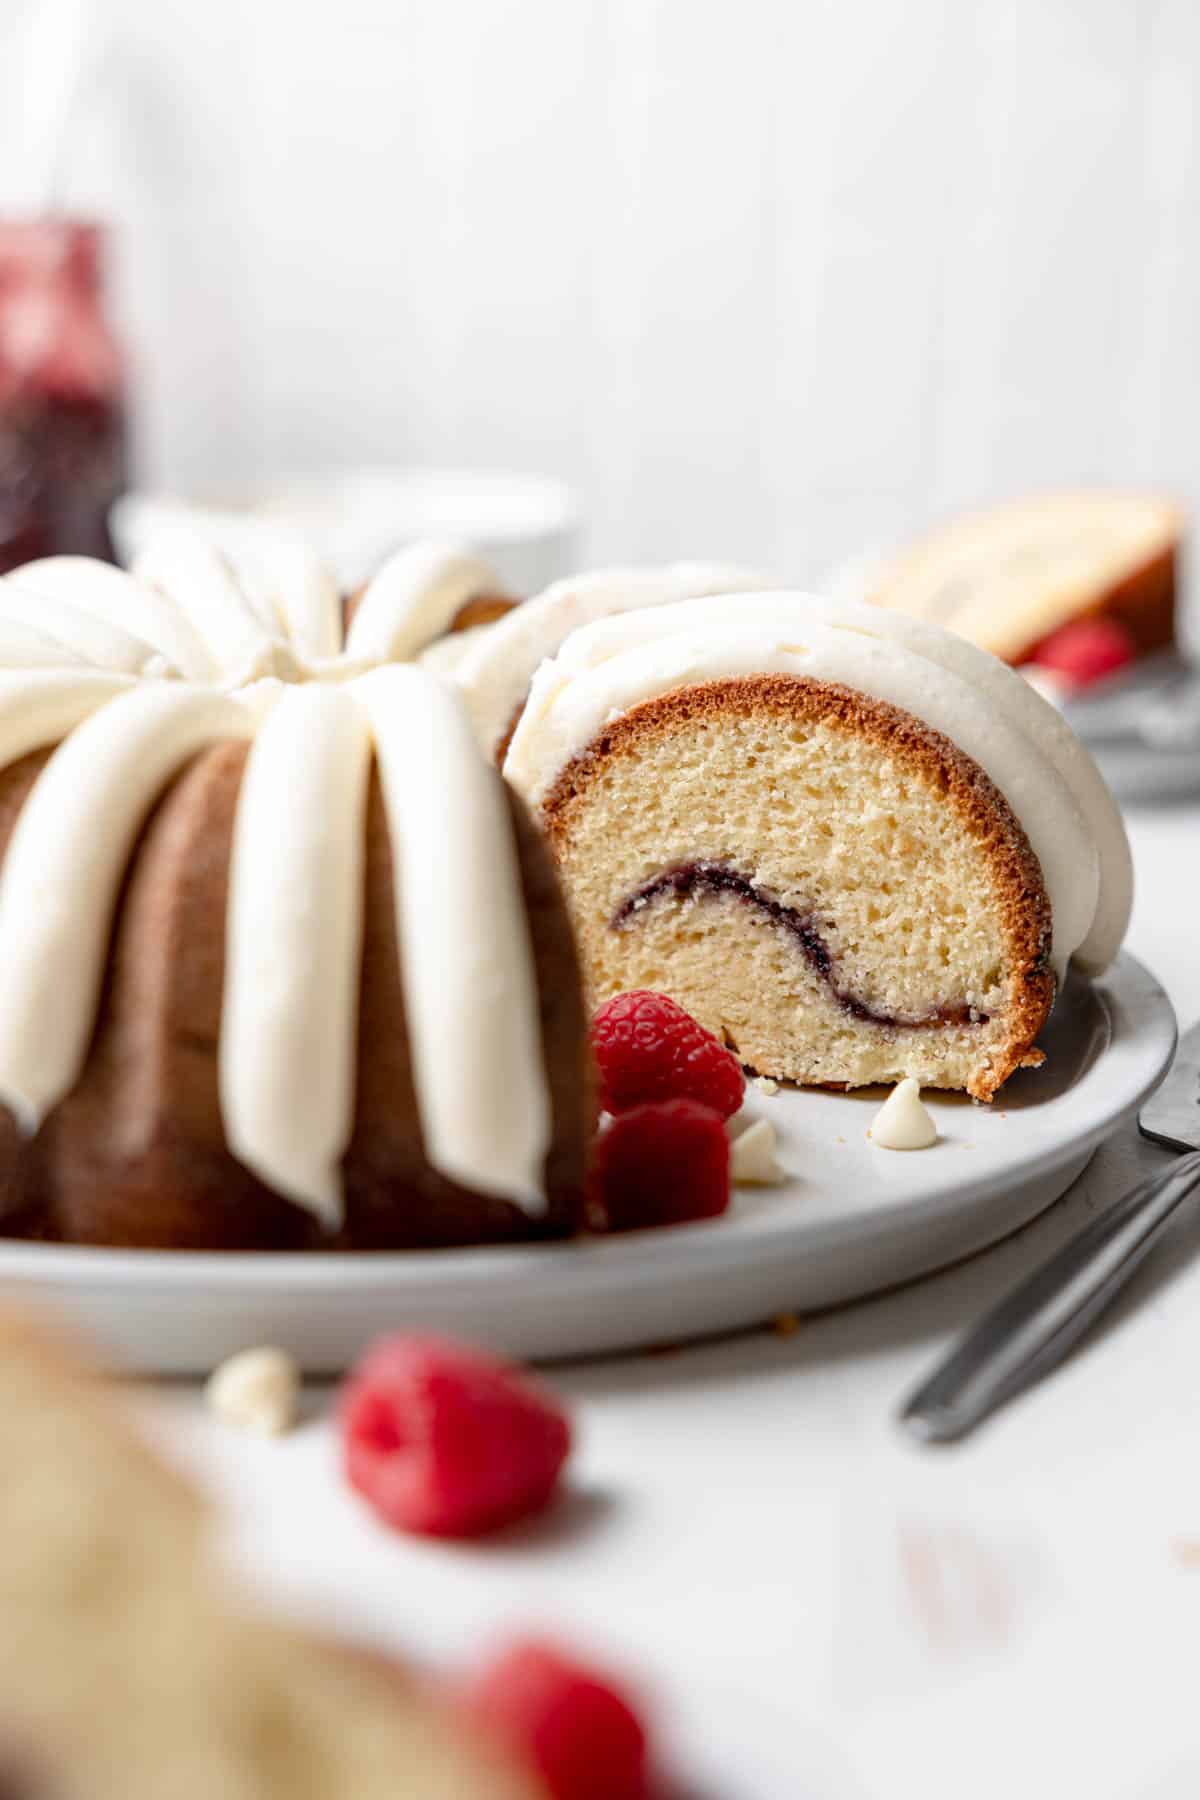 Gluten free white chocolate bundt cake slice with a raspberry swirl in the center and lines of cream cheese frosting piped on top.